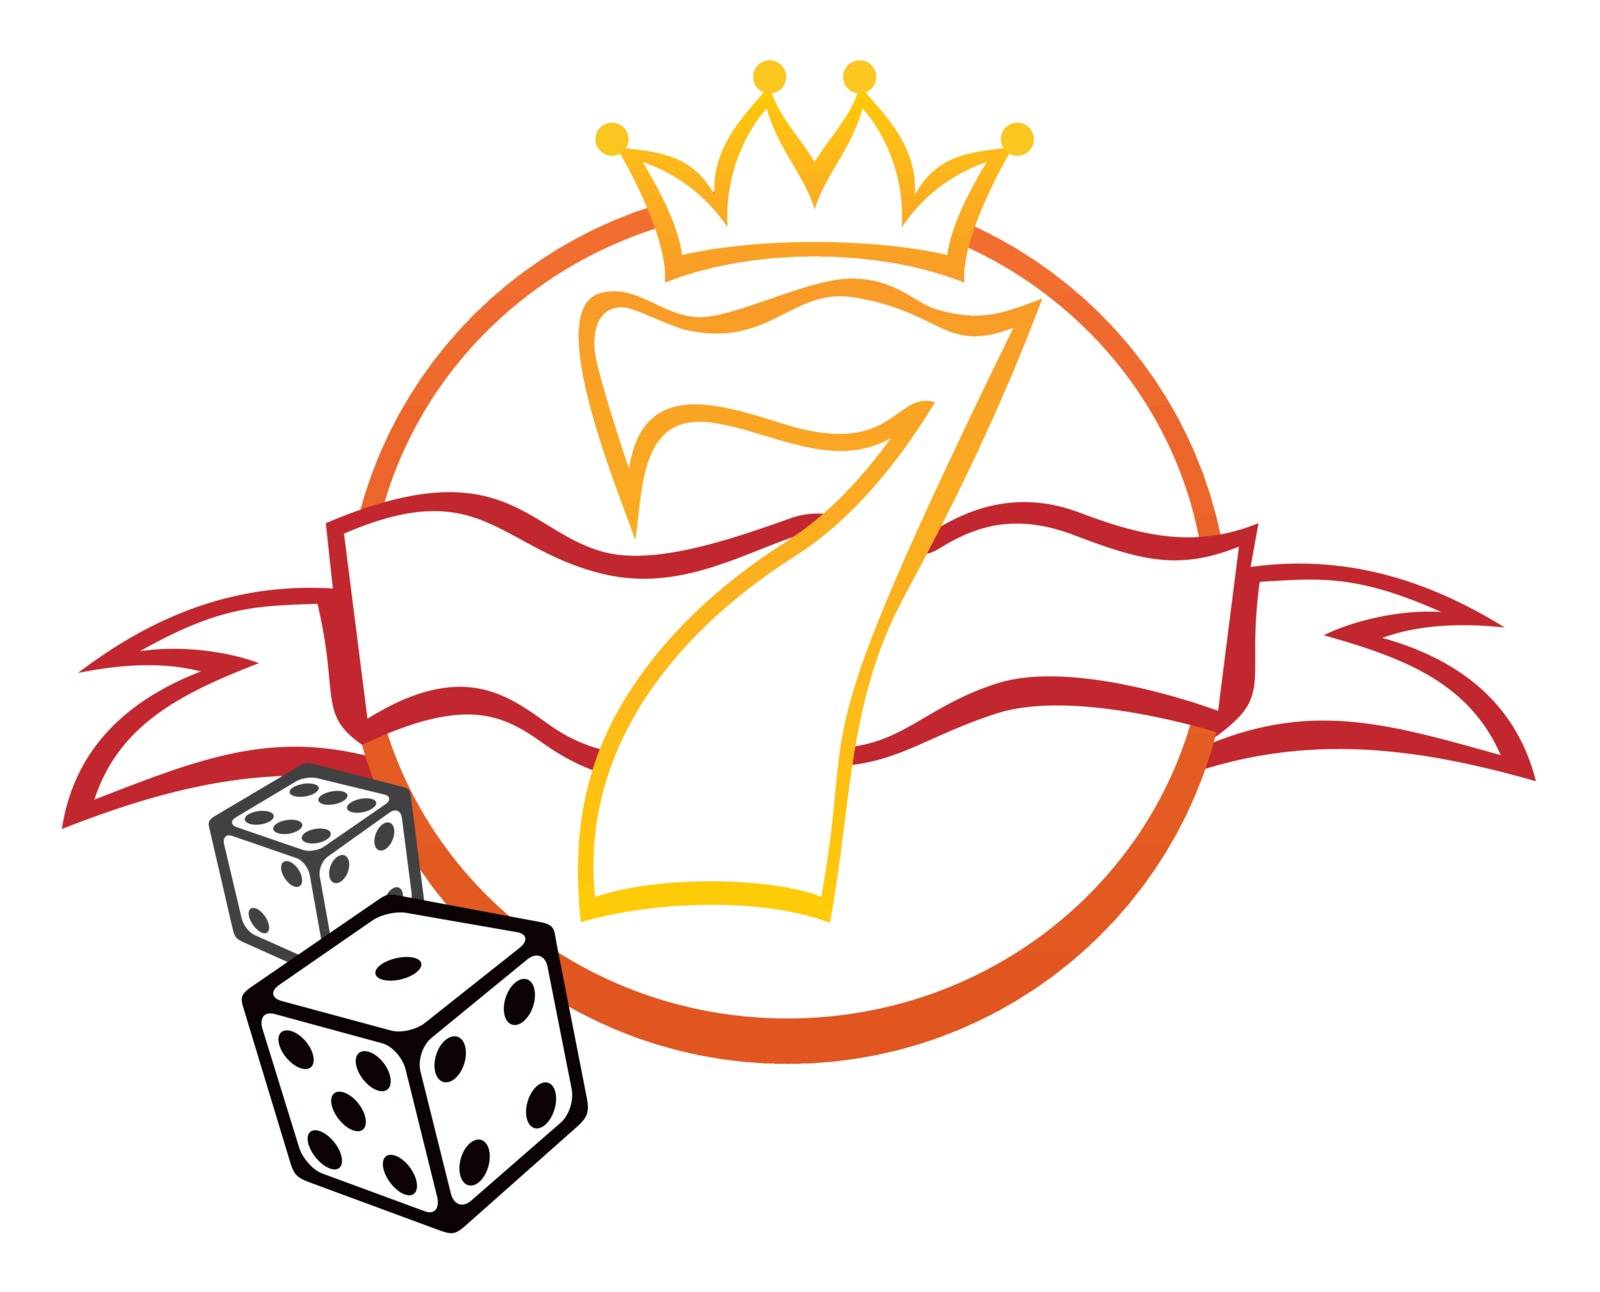 Lucky seven symbol with crown and dices